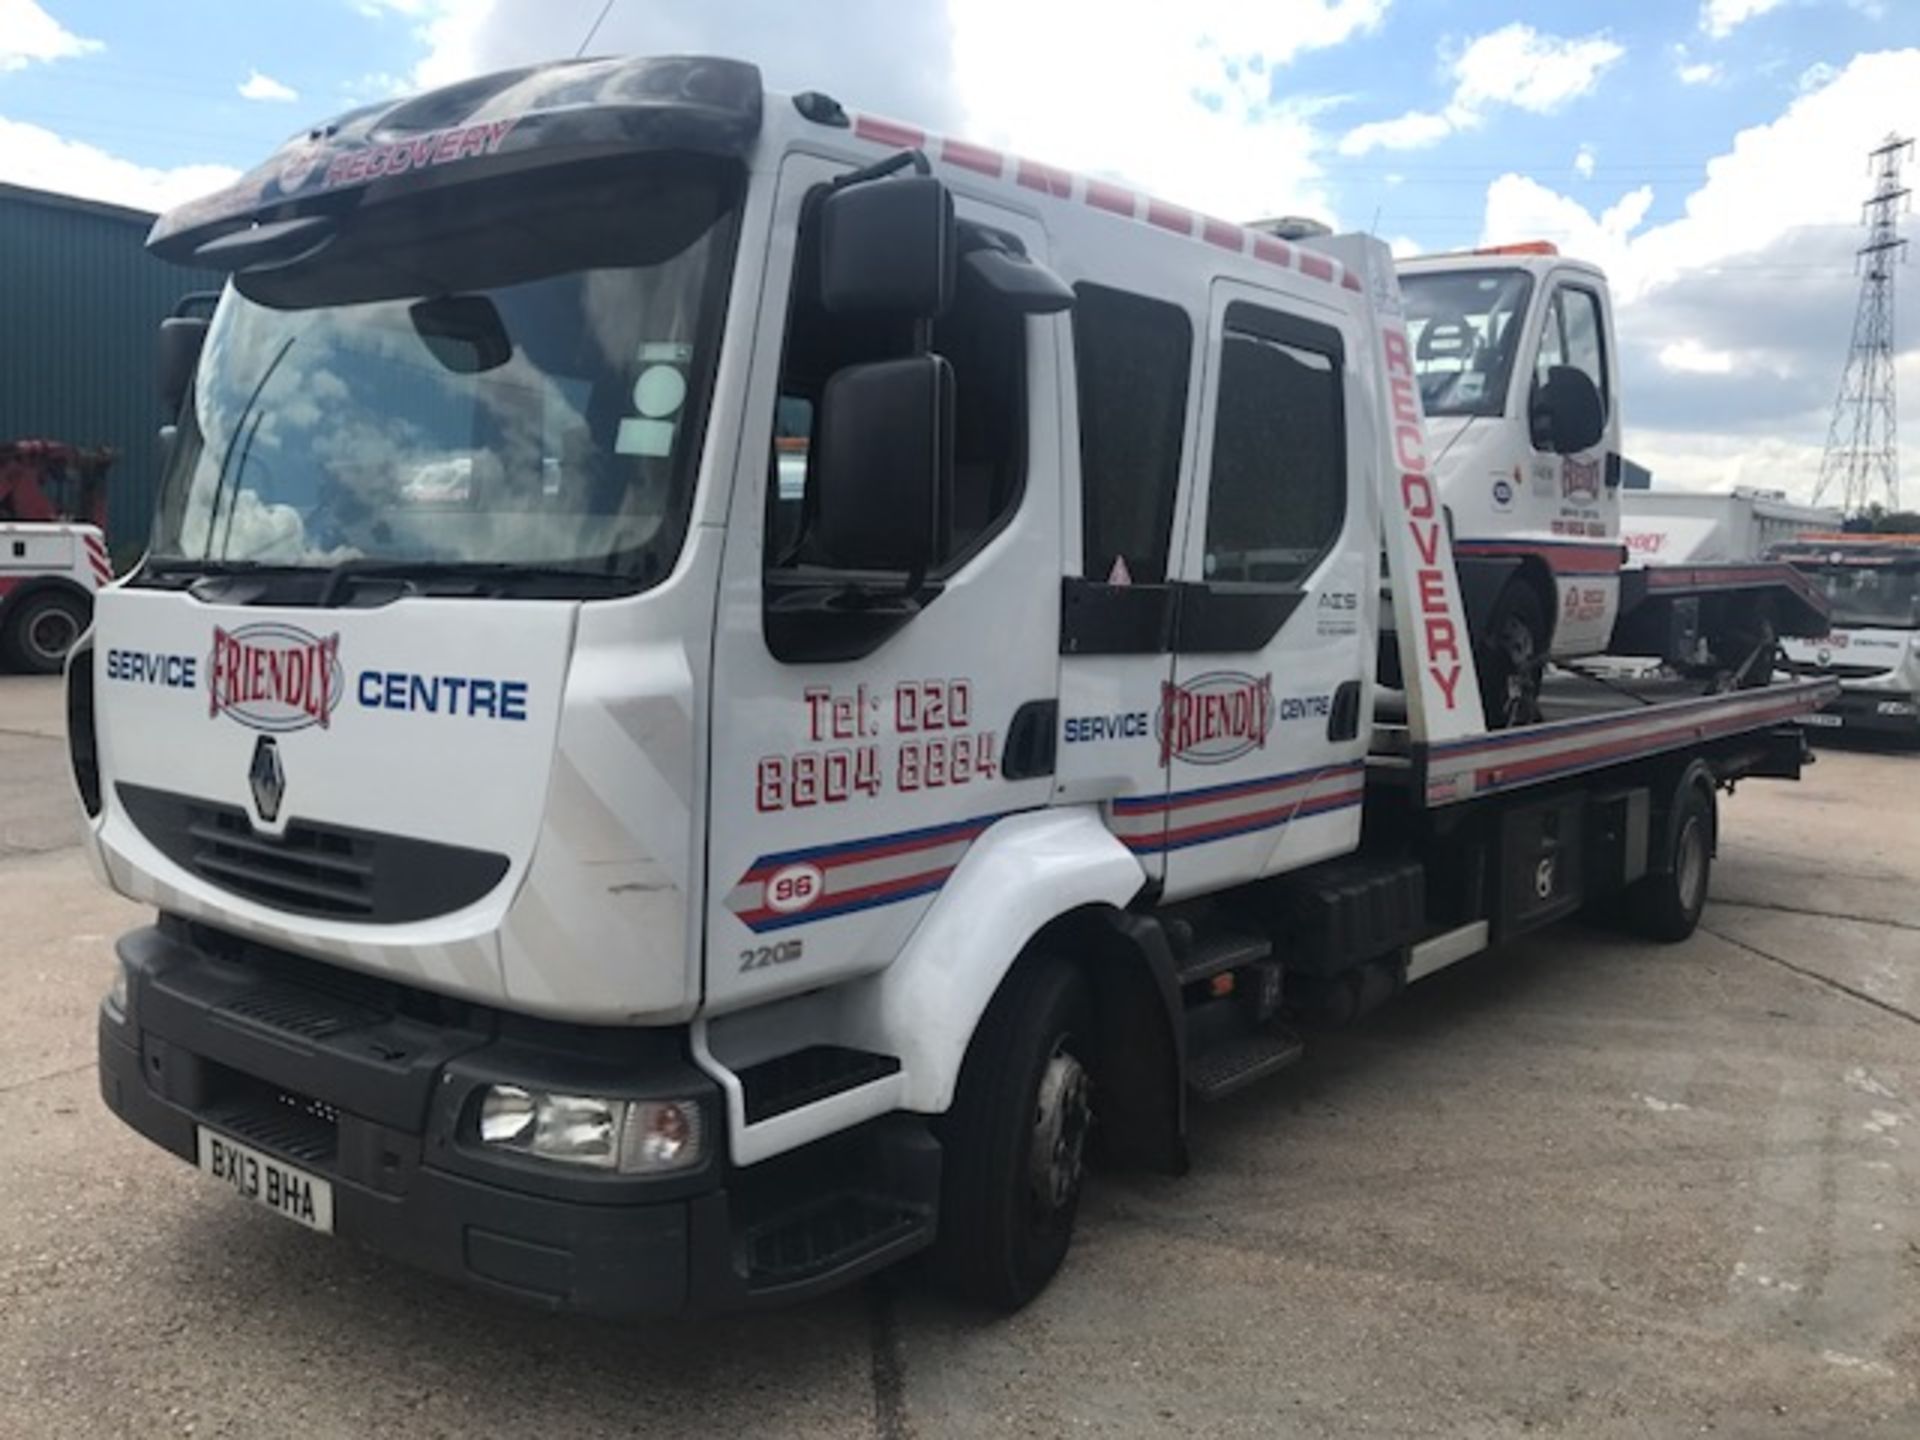 2013 Renault Midlum 220 Dxi crew cab tilt and slide breakdown recovery vehicle complete with spec. - Image 3 of 14